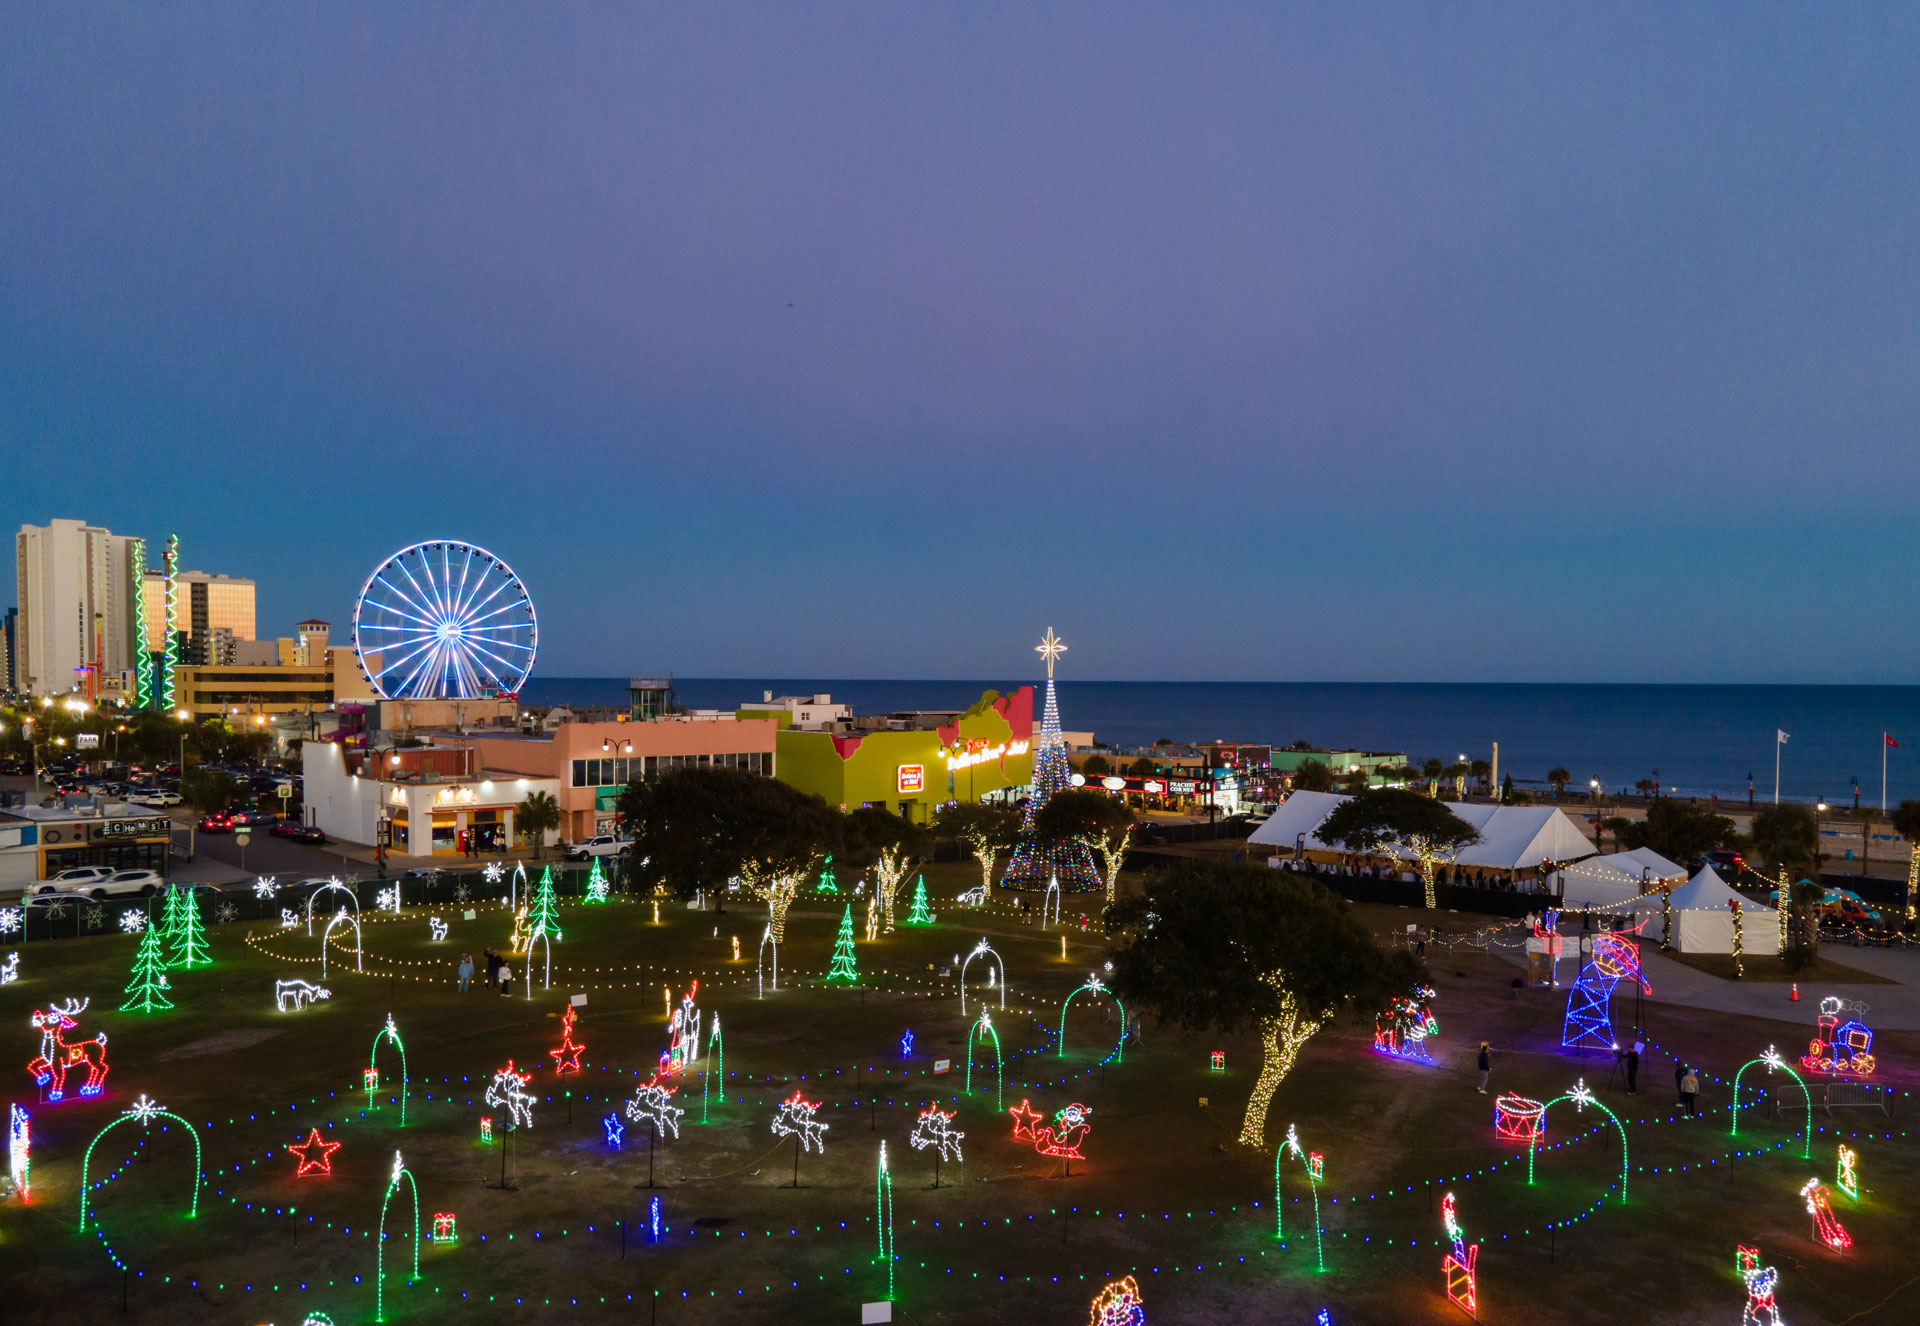 Celebrate the Holidays in Myrtle Beach